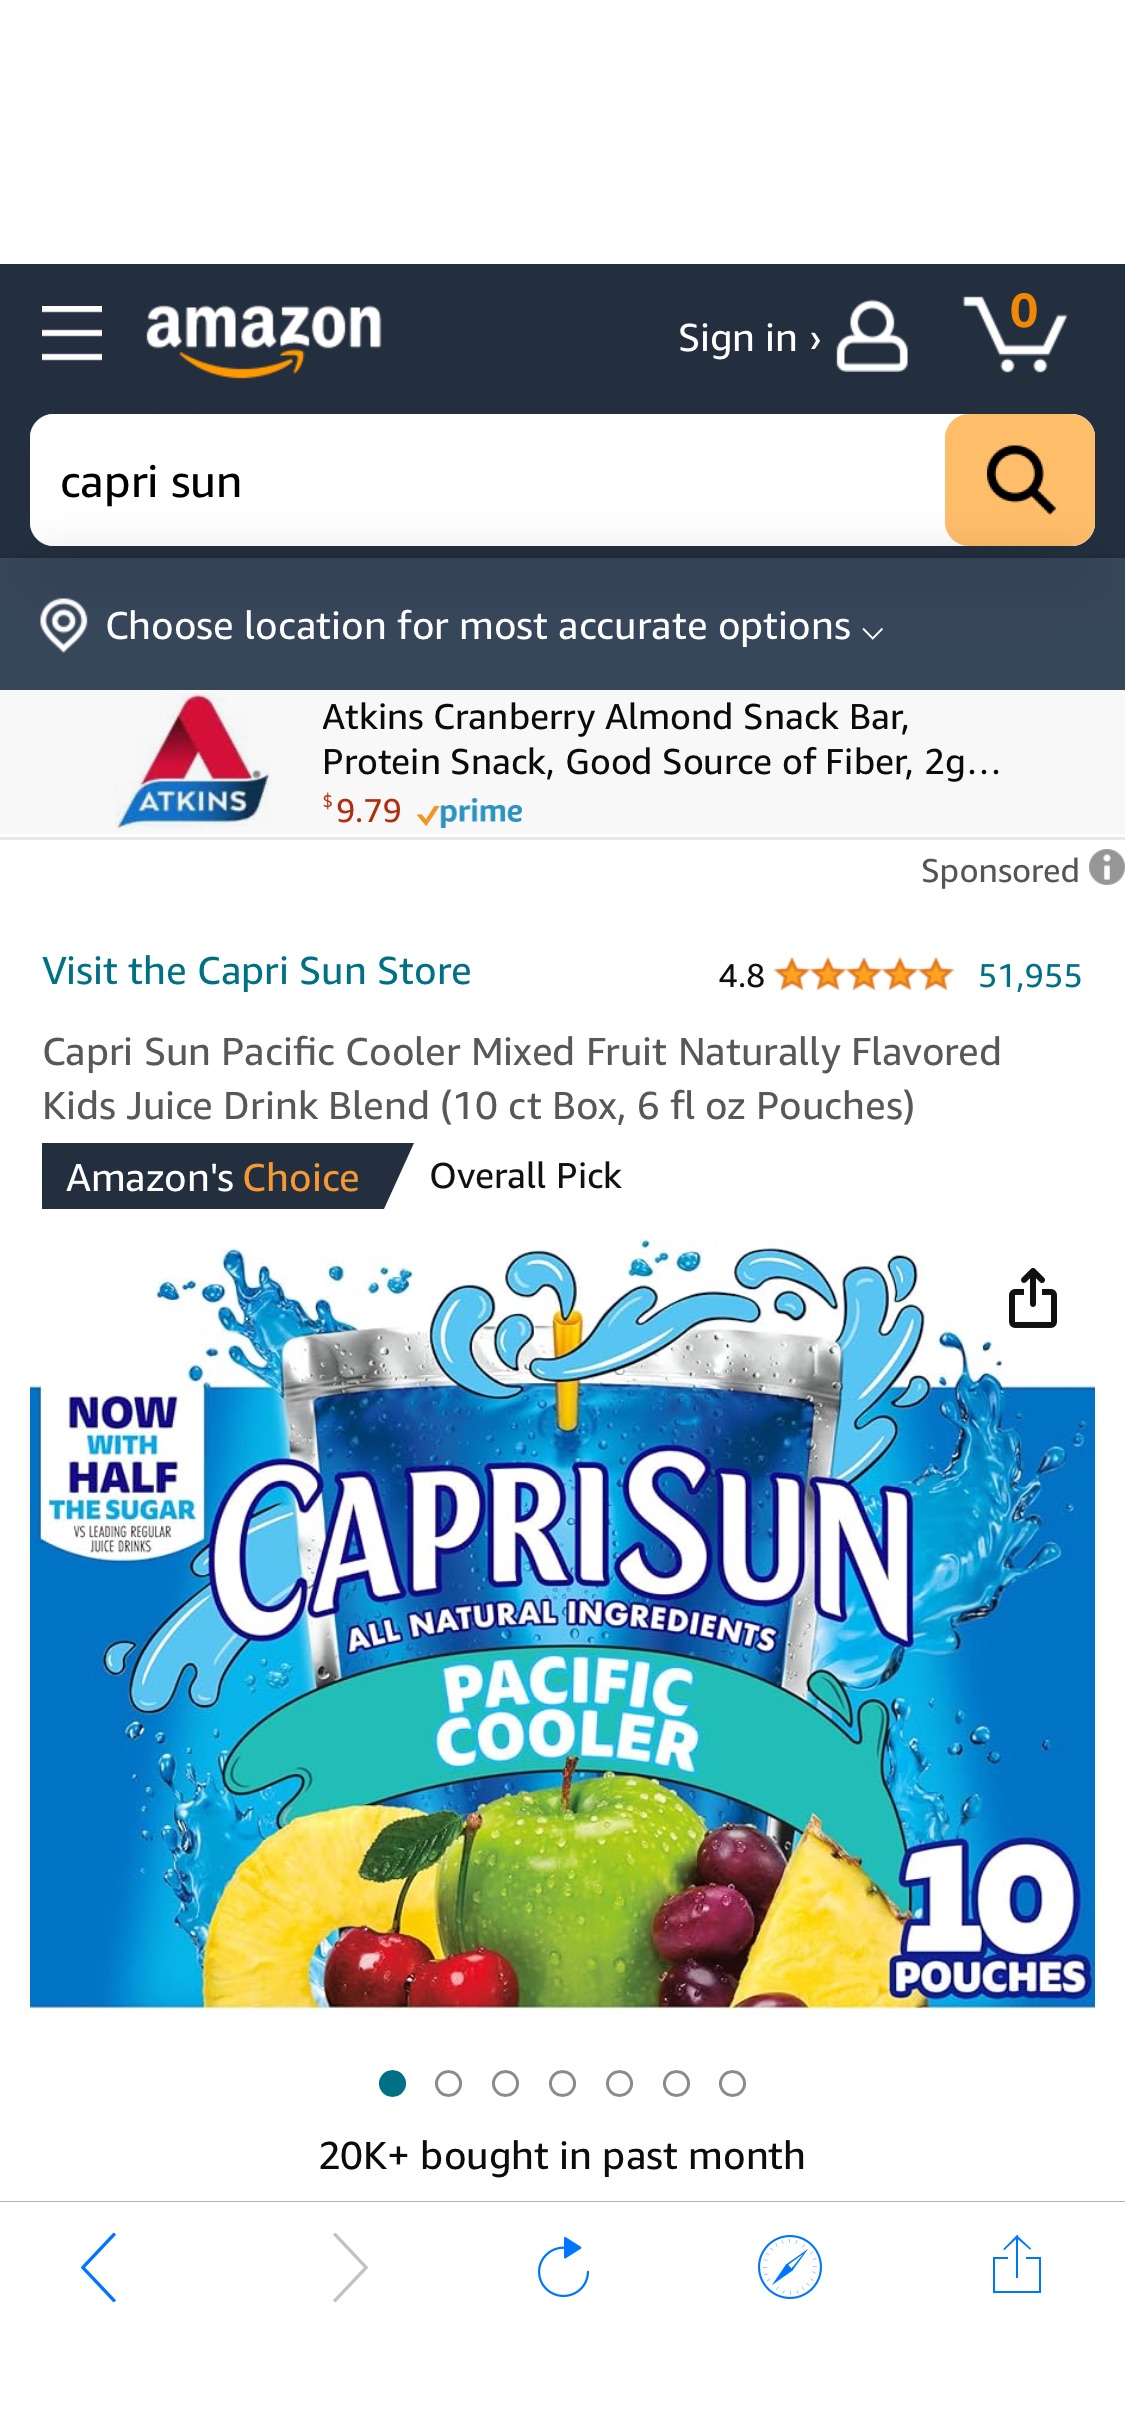 Amazon.com : Capri Sun Pacific Cooler Mixed Fruit Naturally Flavored Kids Juice Drink Blend (10 ct Box, 6 fl oz Pouches) : Grocery & Gourmet Food 果汁饮料